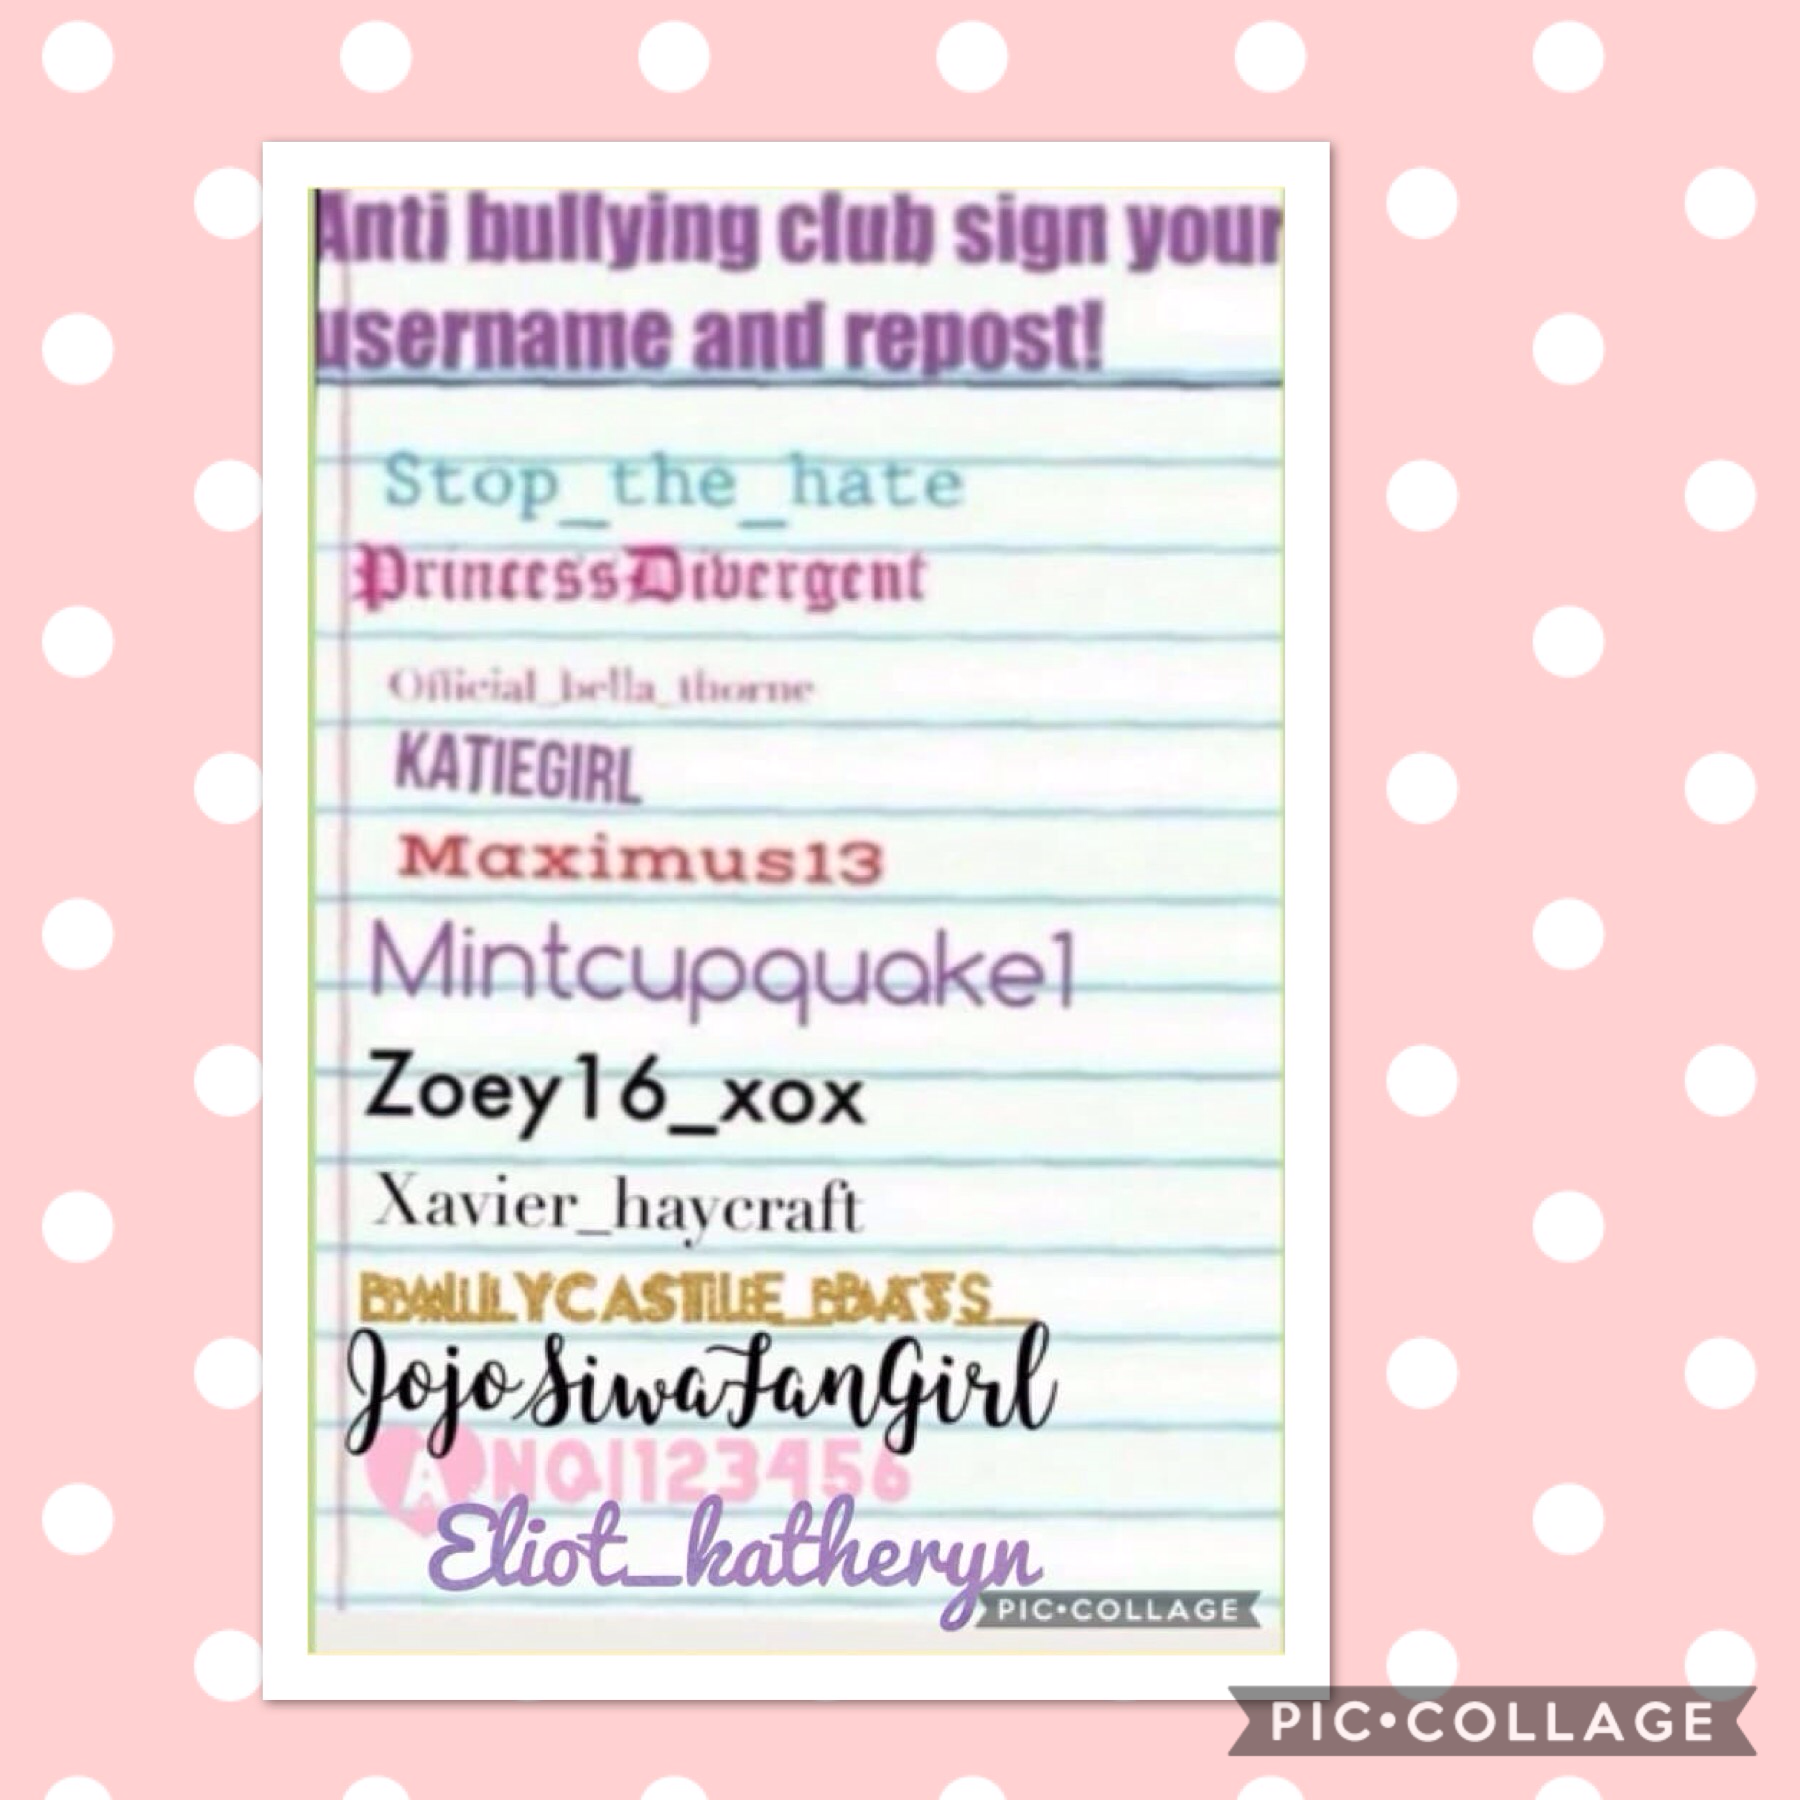 TAP. 


Hey I know that bullying is a big issue so I did this but I just reposted so don't give me all the cred!!!😊